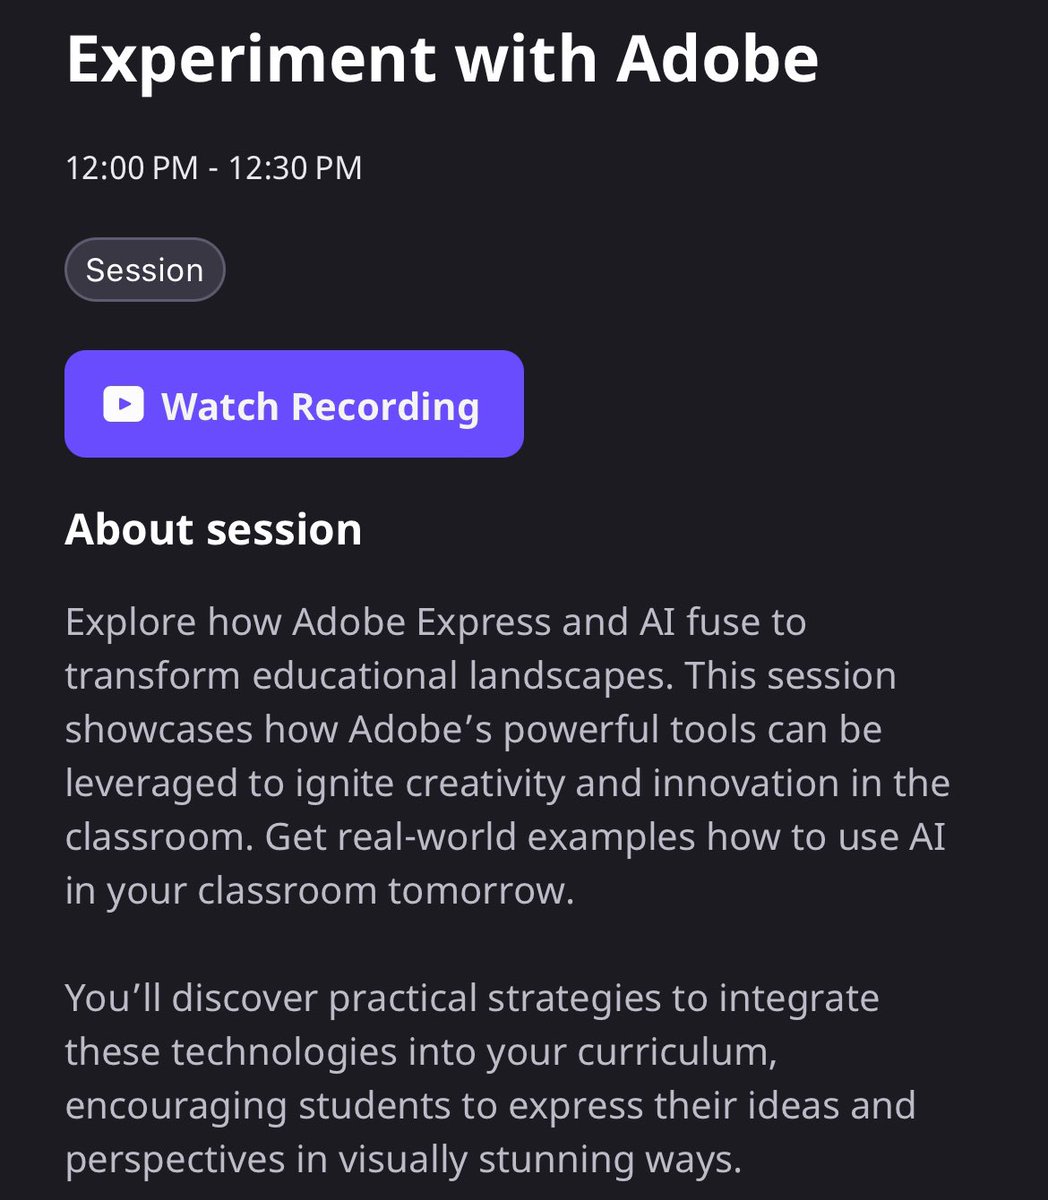 Fantastic AI For Education Summit session by @MrsBongiornoEdu and @jlubinsky showcasing experimentation and creative options for using @AdobeExpress with students! #AdobeEduCreative 🔥 💡 💻 📱